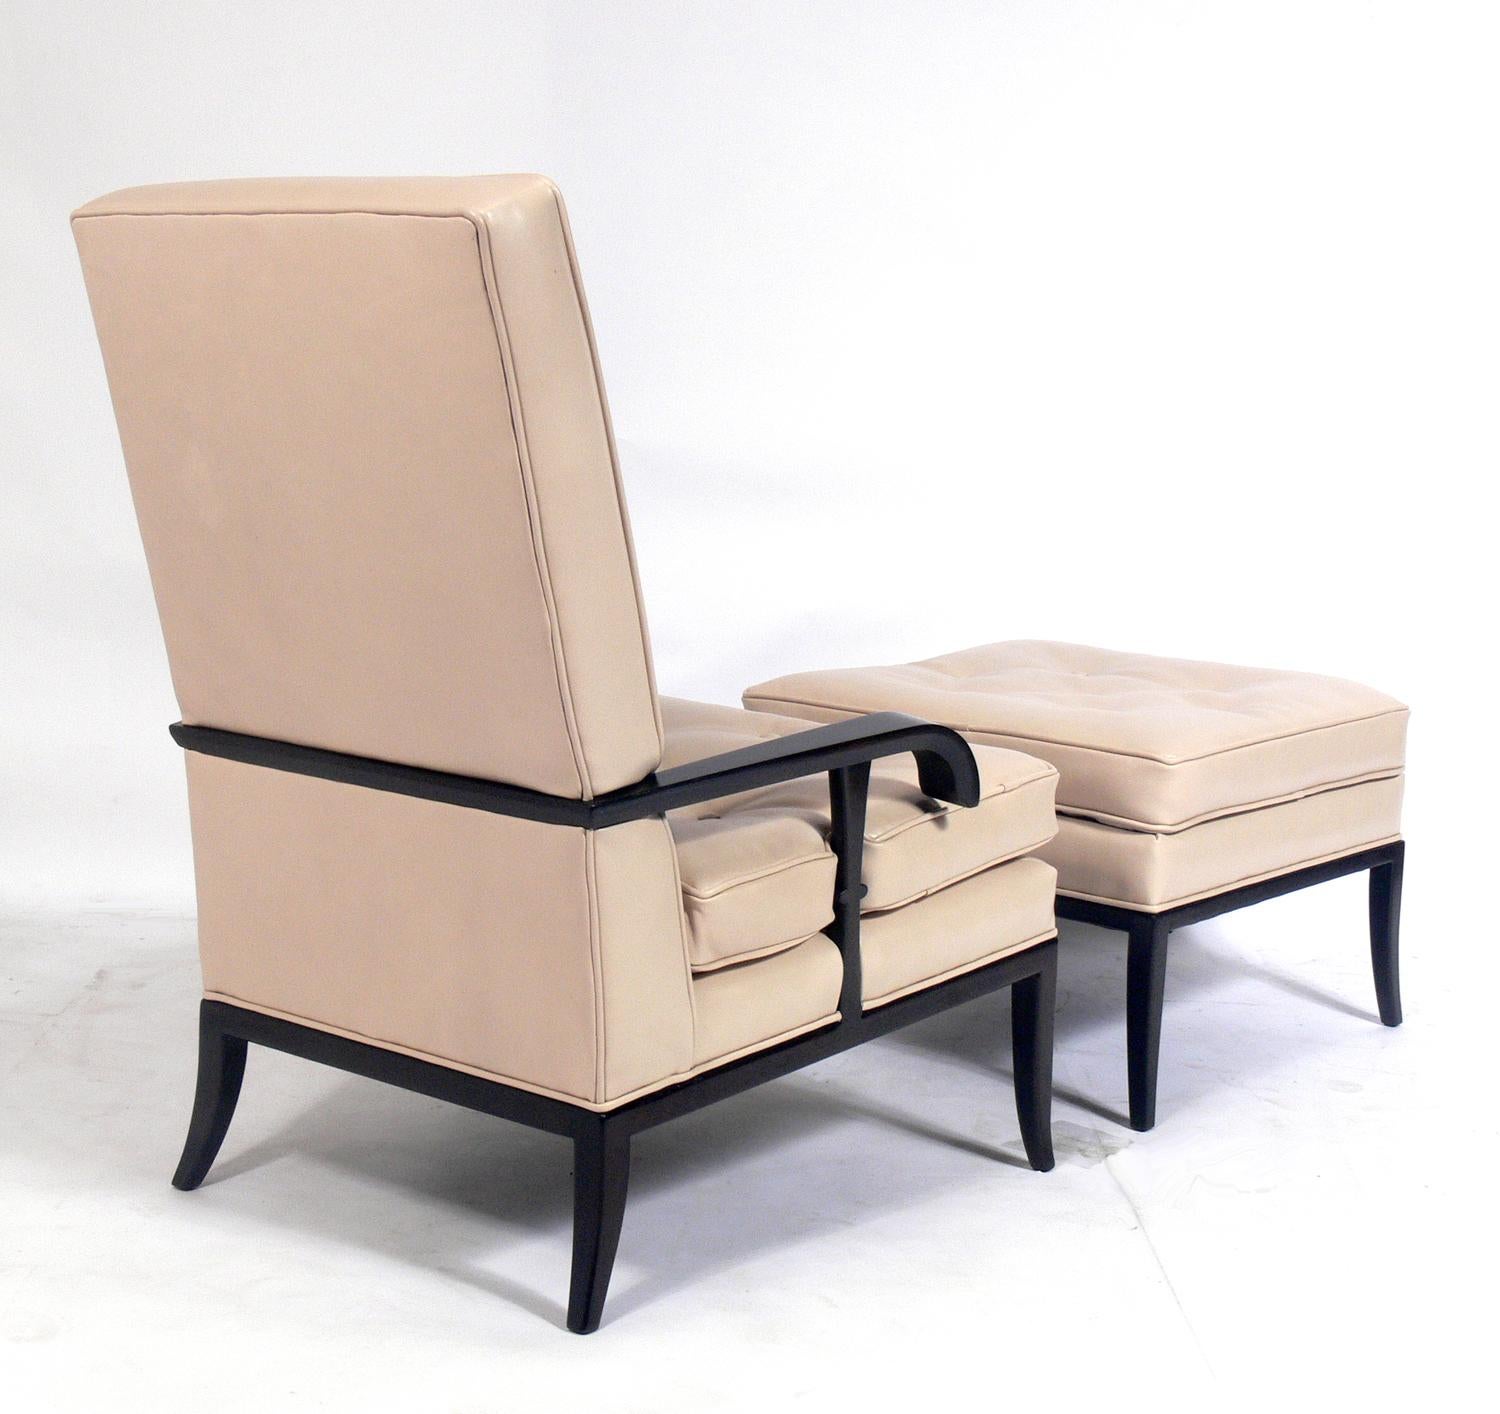 Elegant lounge chair and ottoman, designed by Tommi Parzinger for Parzinger Originals, American, circa 1950s. These pieces have been completely restored. Reupholstered in a sand color leather and refinished in an ultra deep brown color. The chair